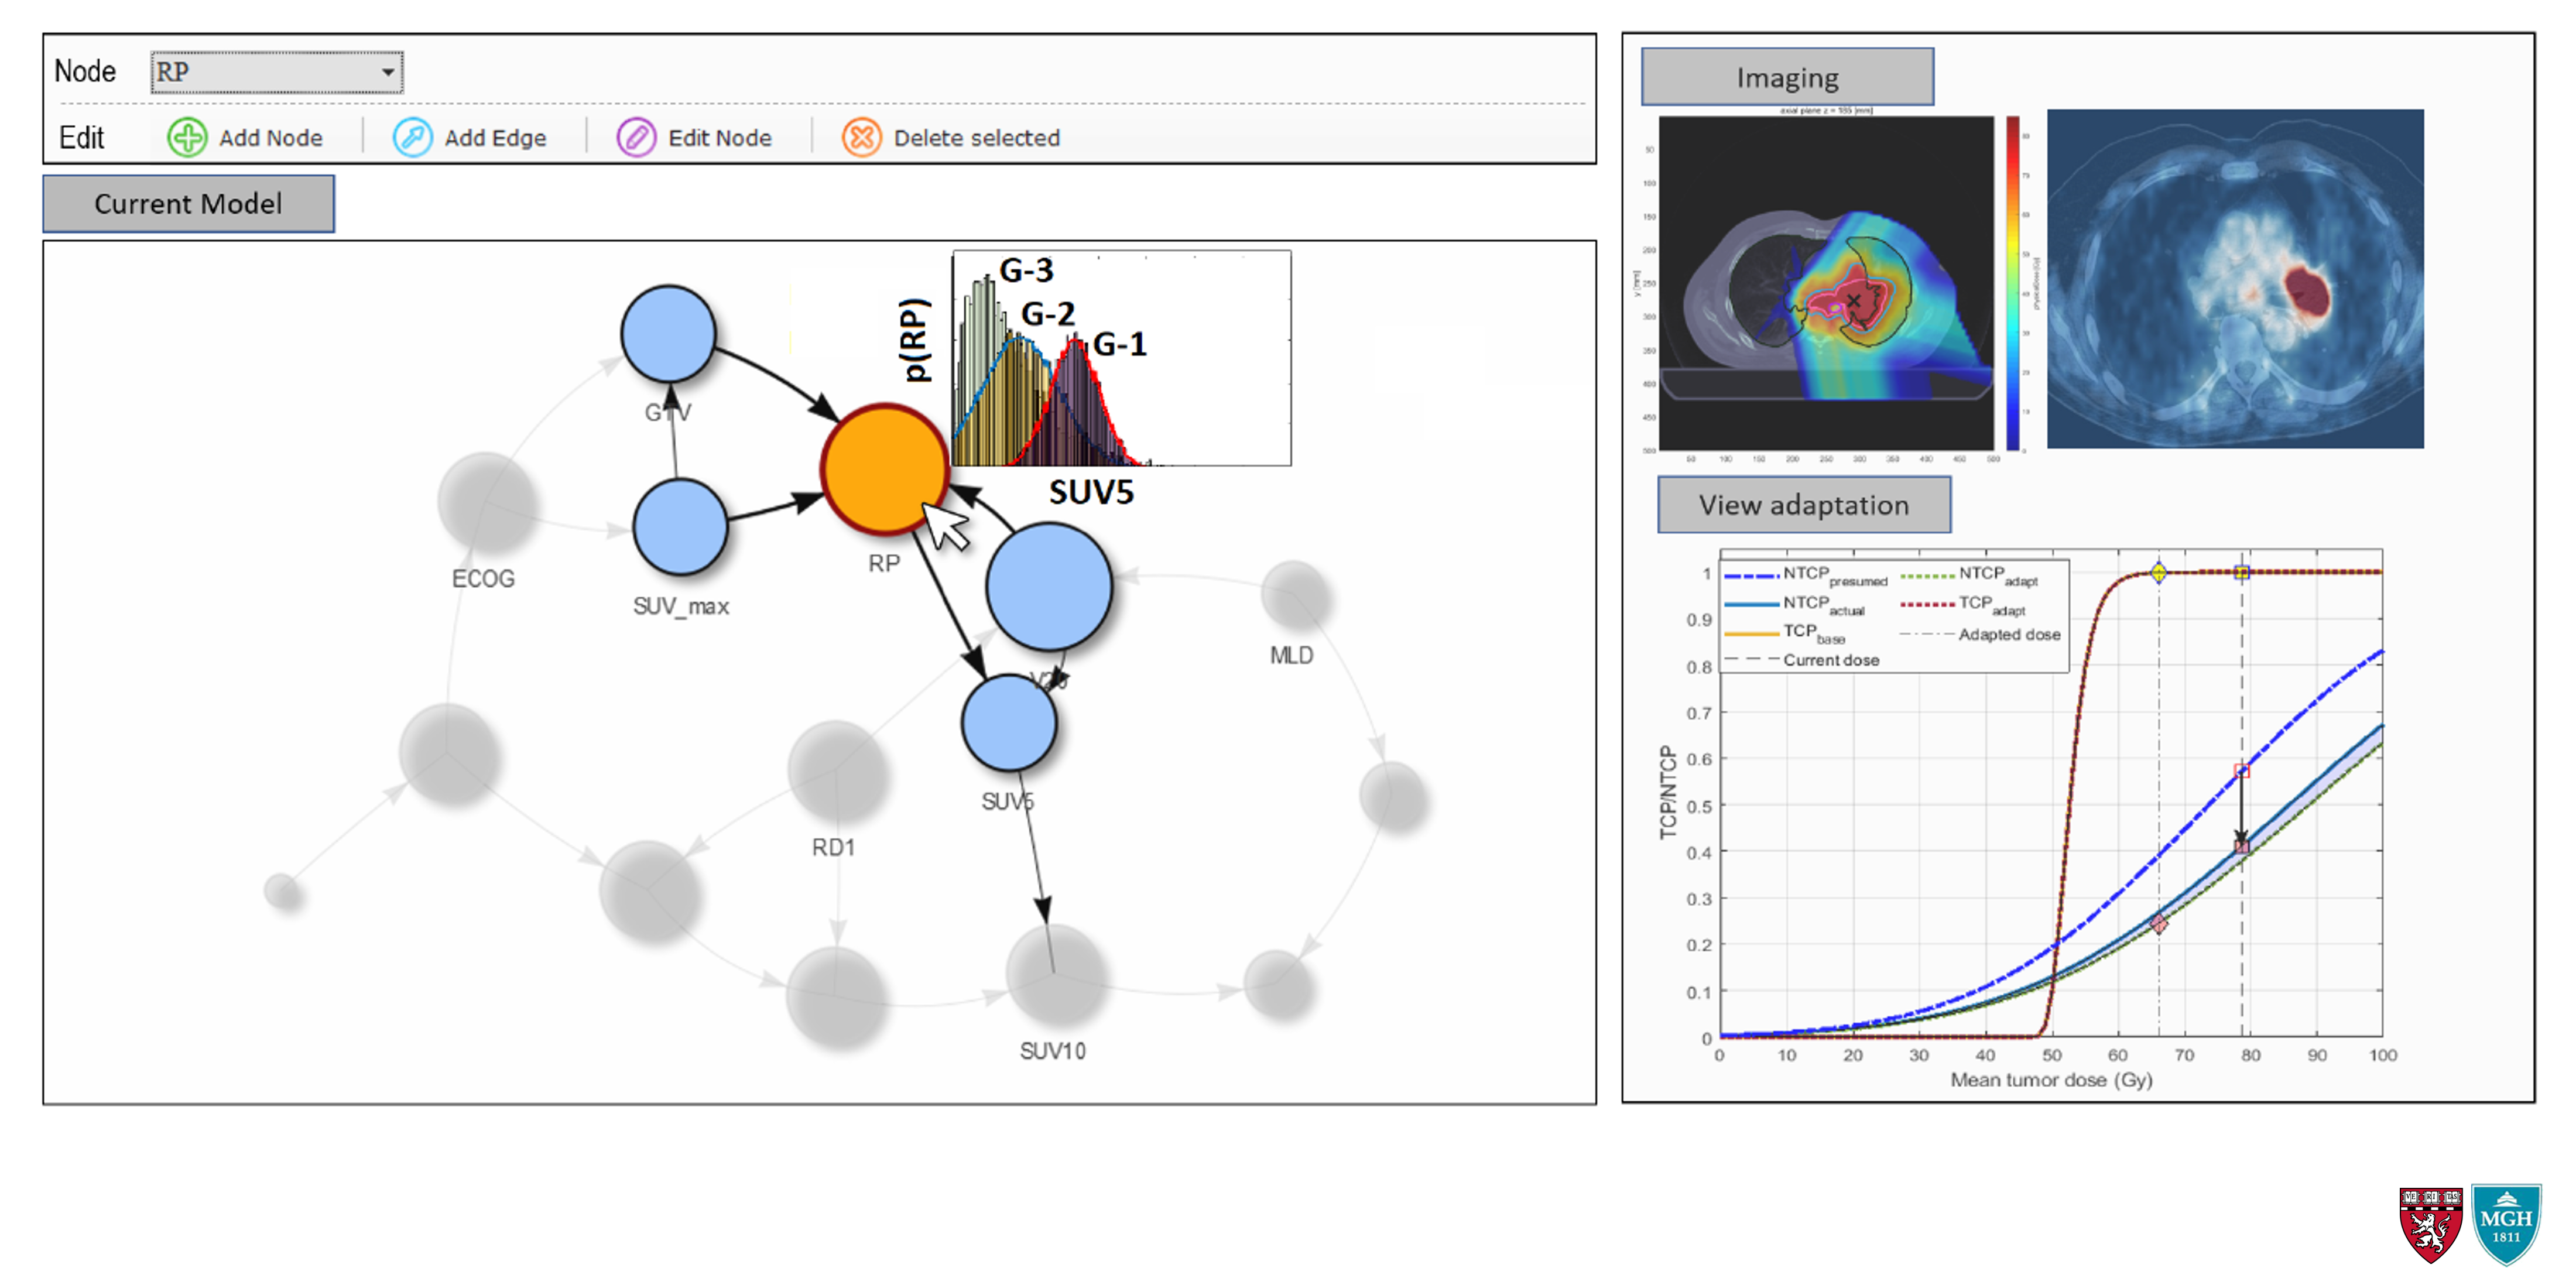 OSRT Personalized Adaptation Dashboard using interpretable machine learning (Bayesian Networks) for mid-course predicting lung radiation pneumonitis (RP)